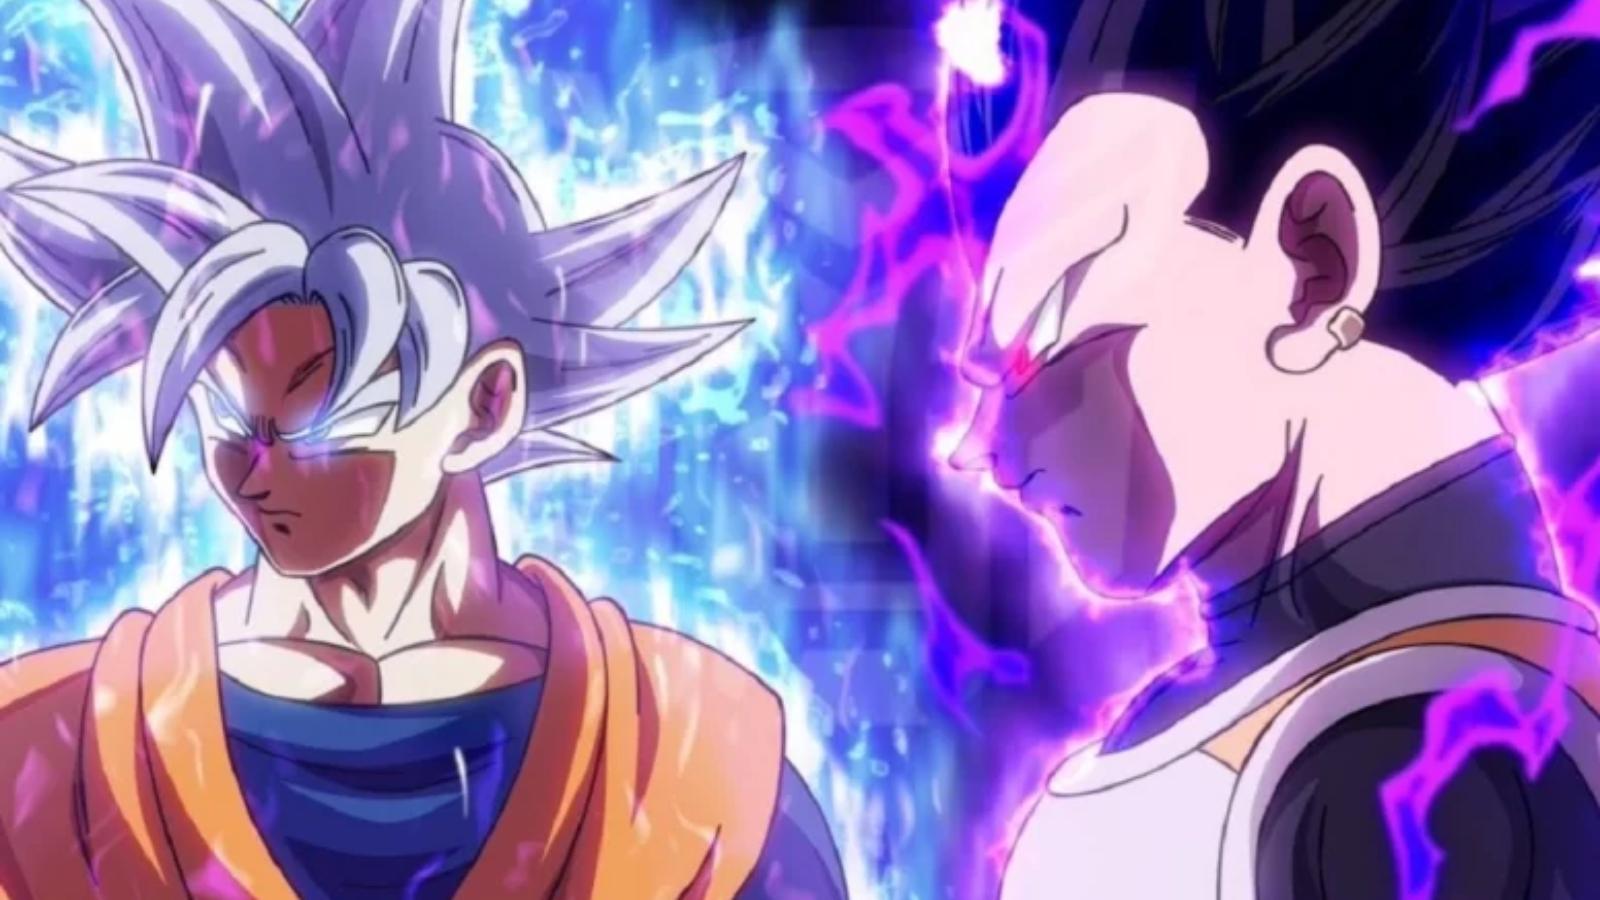 Will Dragon Ball Super's New Movie Set Up the Return of the Show?